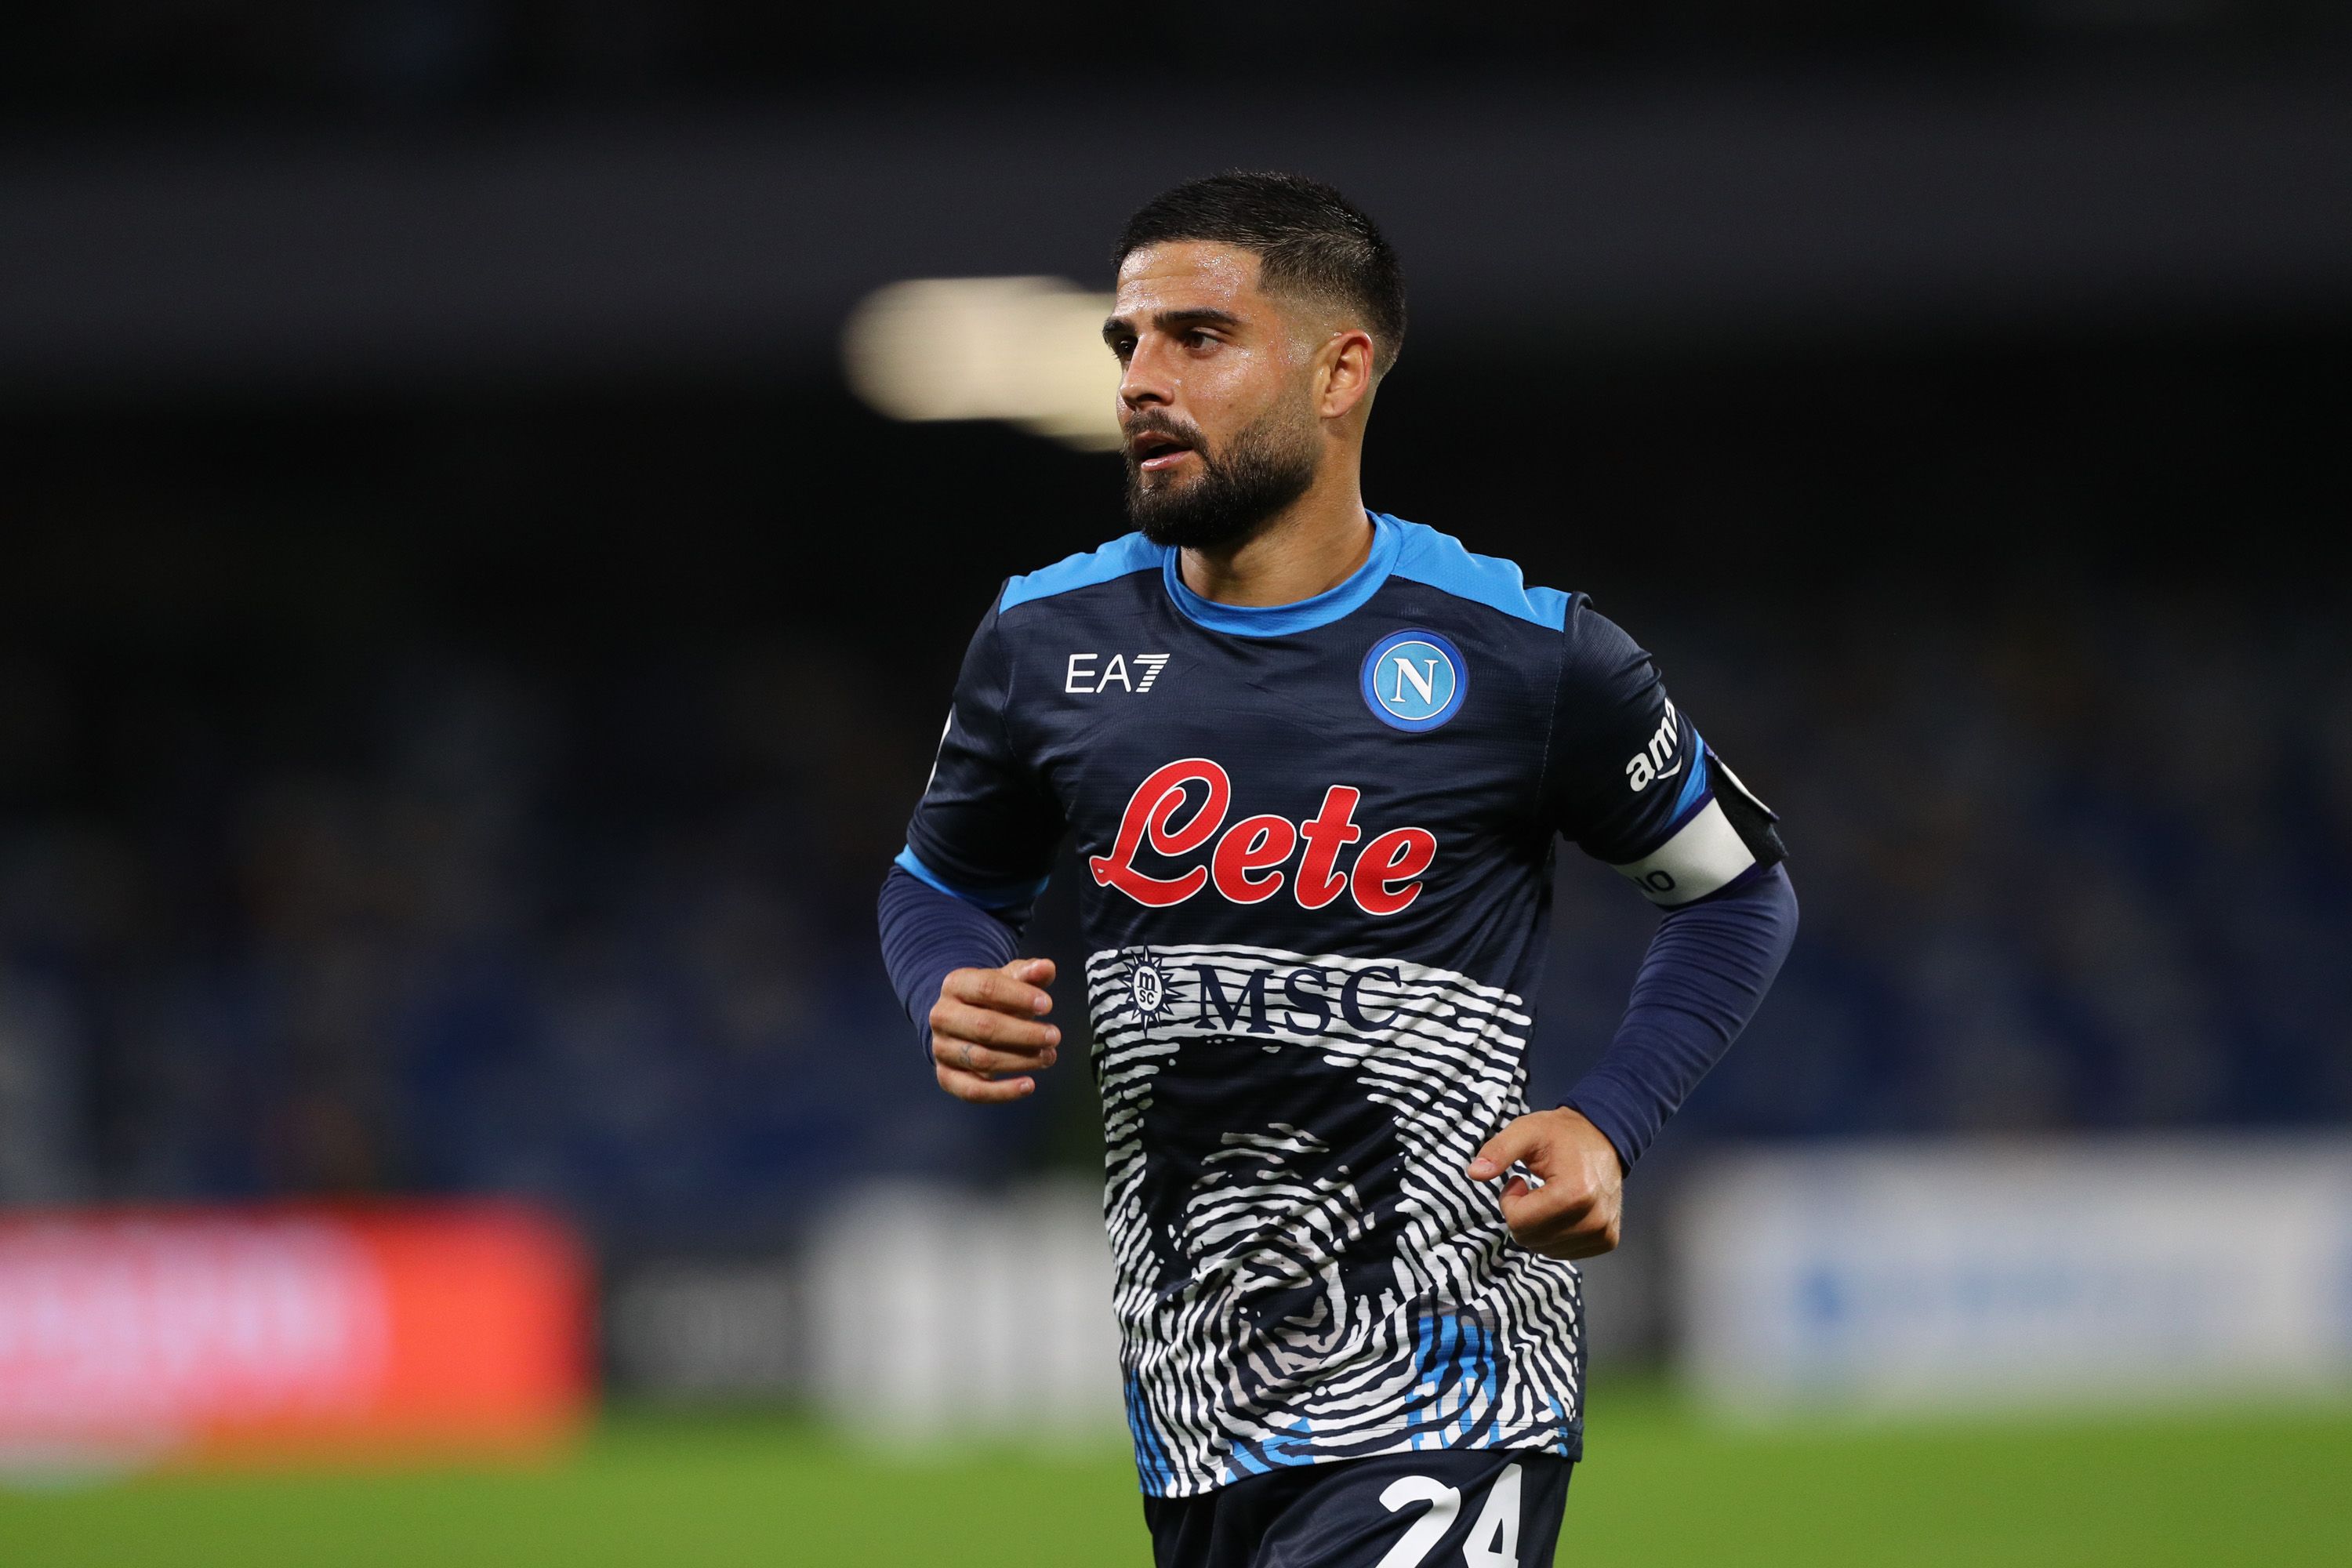 Cagliari - Napoli Bets, Odds and Lineups for the Serie A Match | February 21